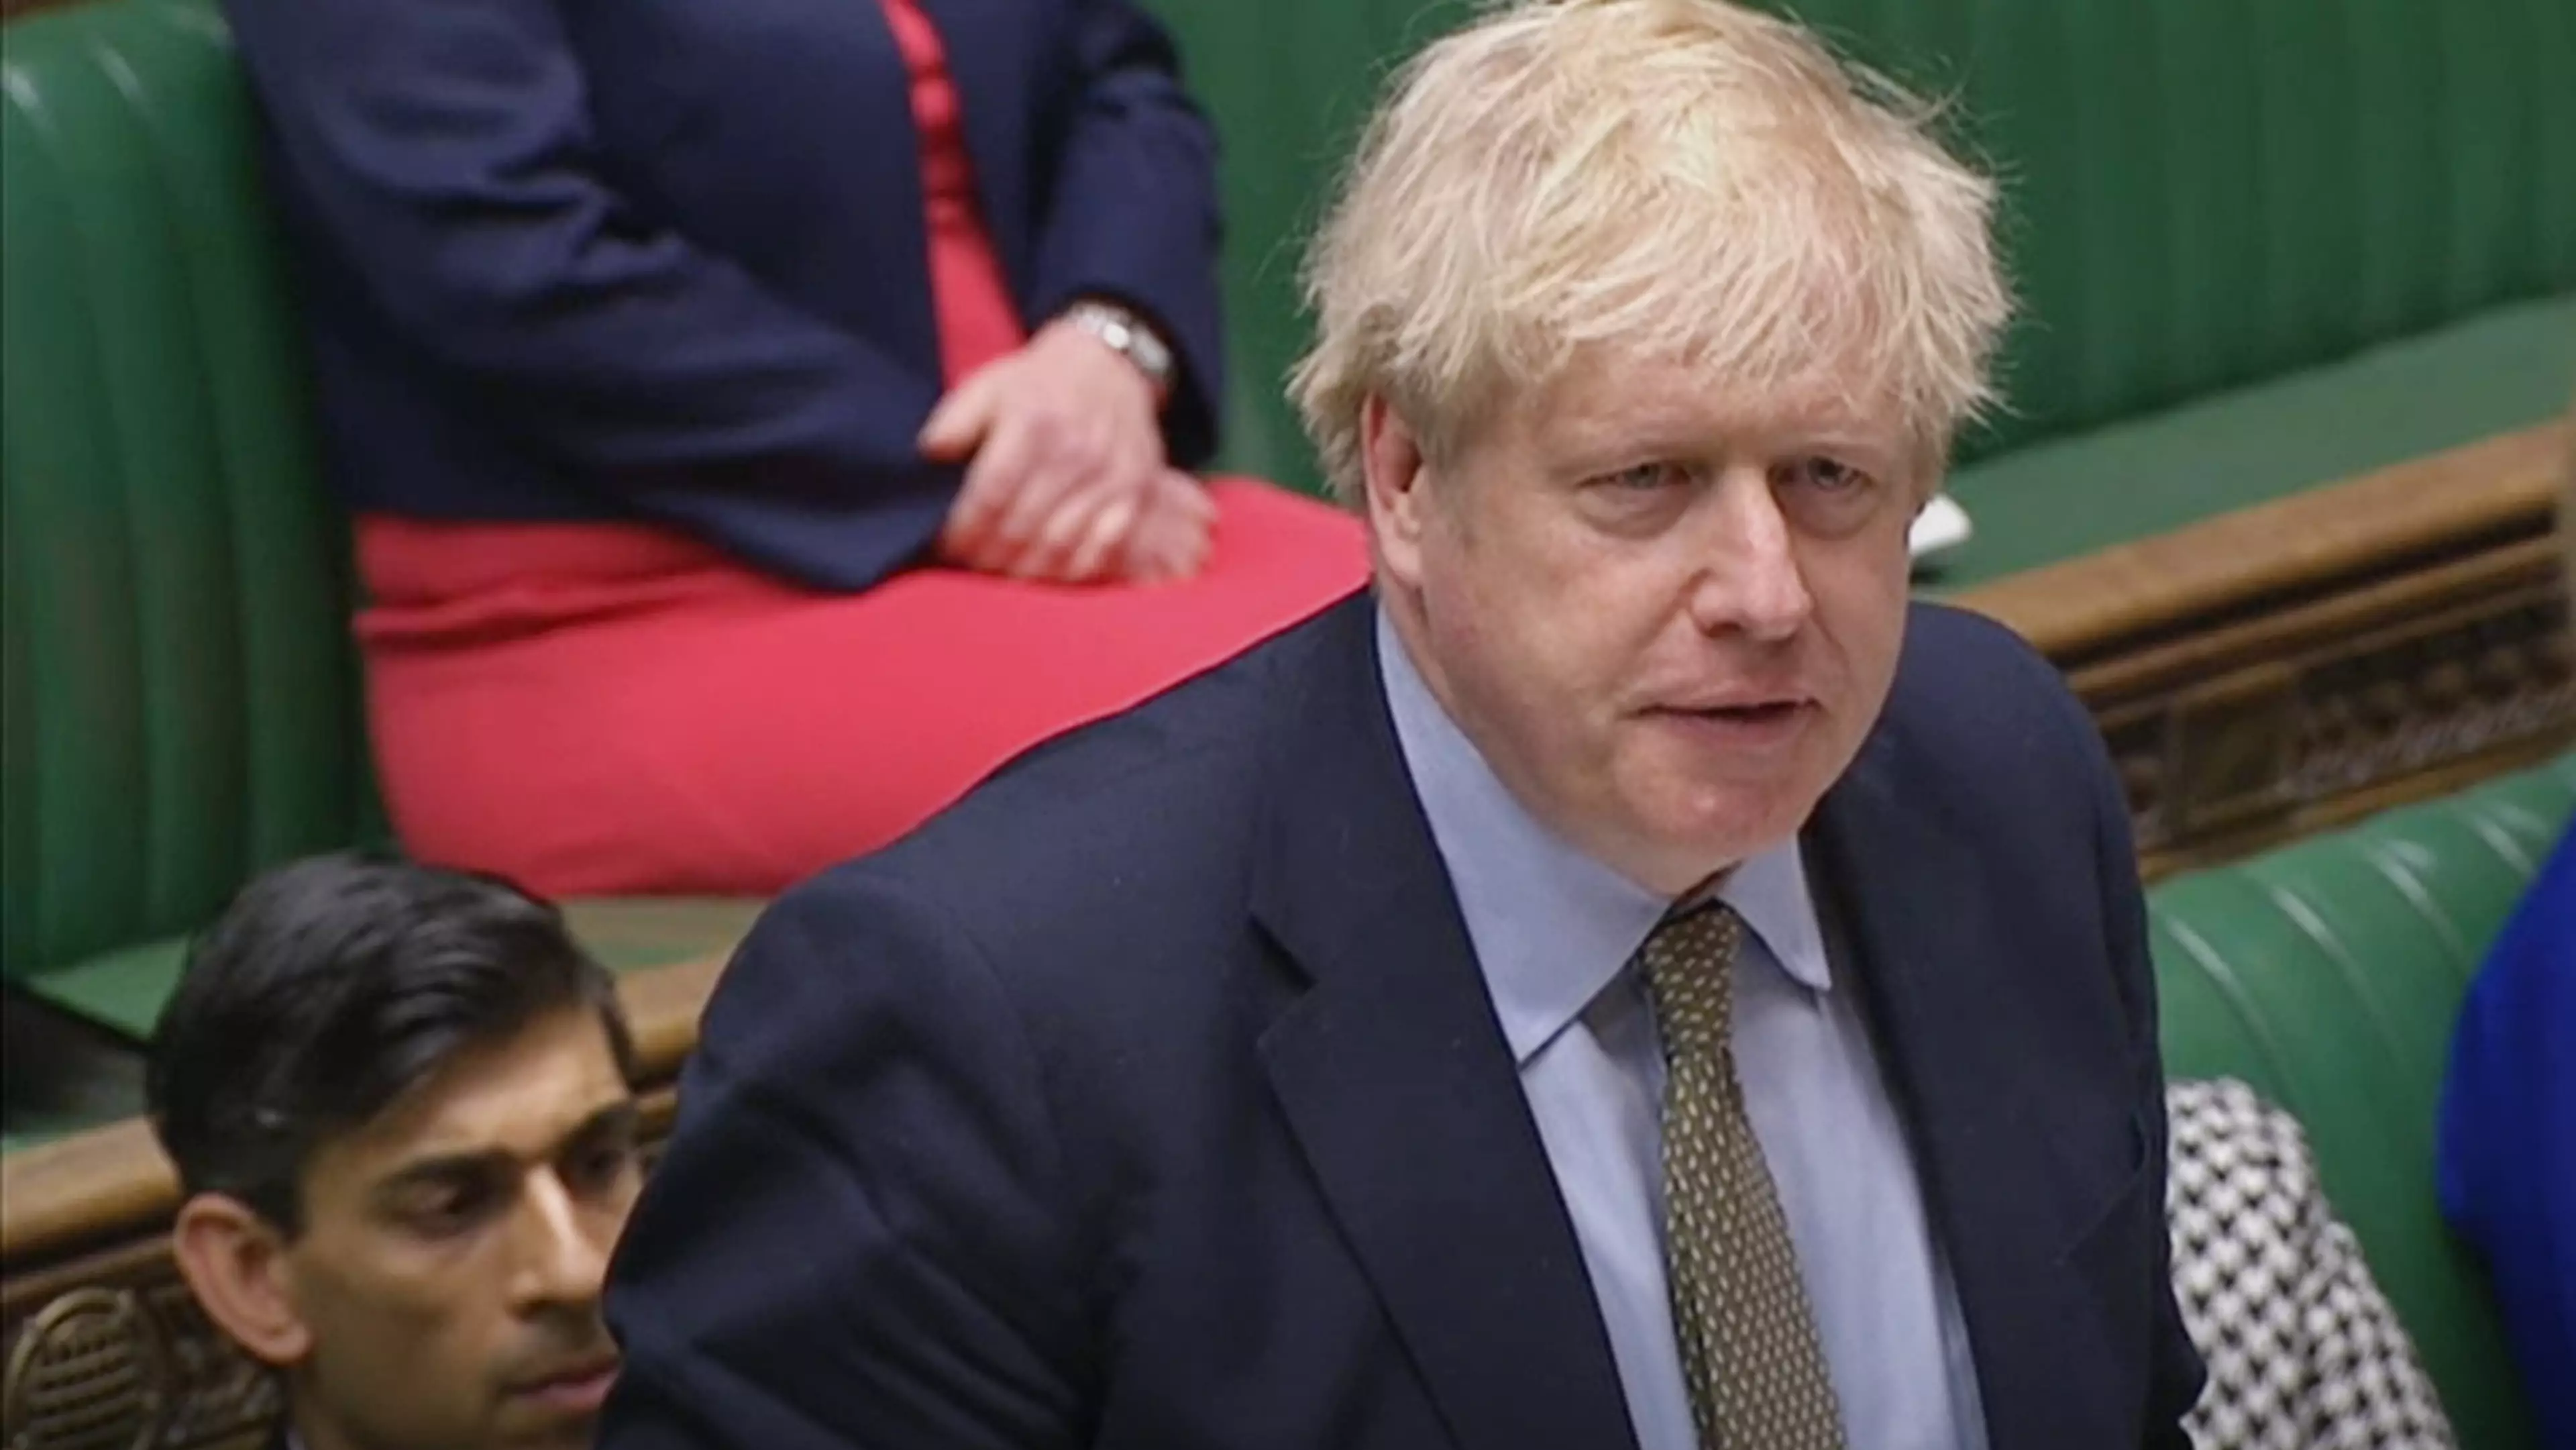 Boris Johnson Is In A 'Stable' Condition In Intensive Care